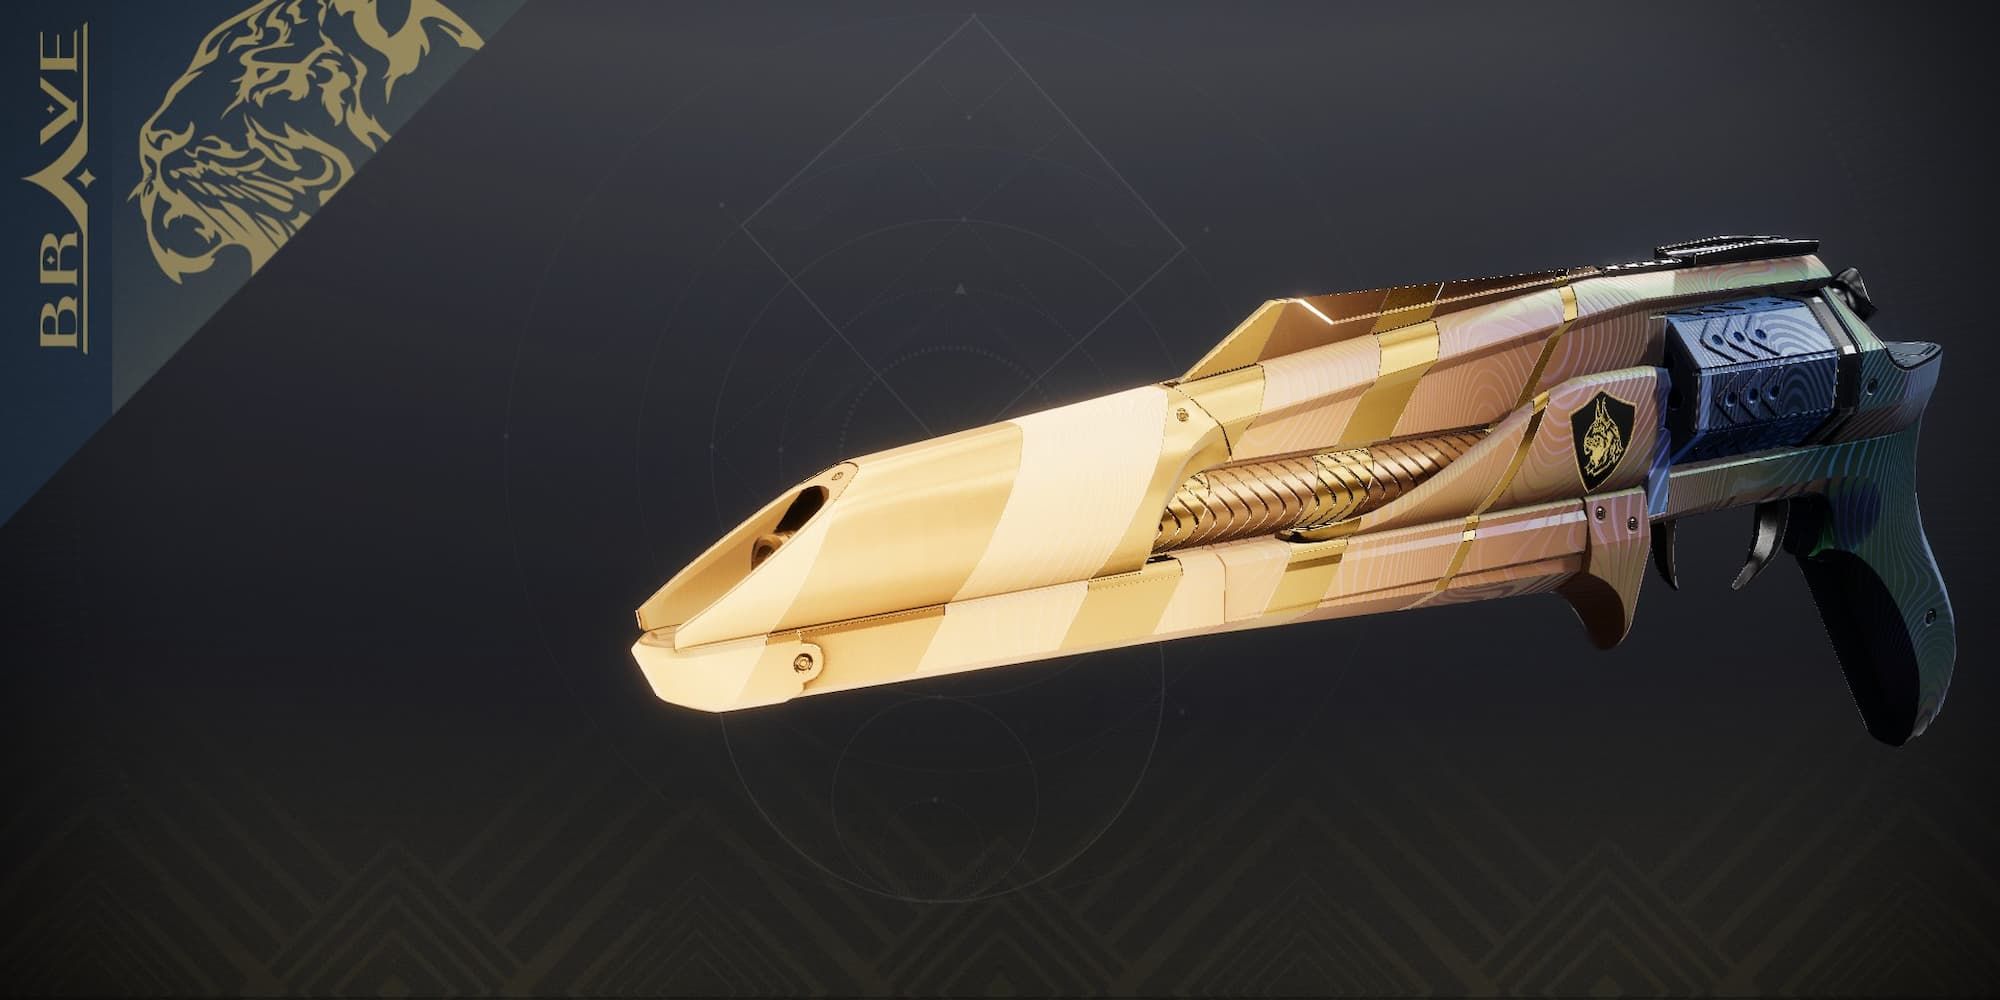 BRAVE Midnight Coup variant in Destiny 2